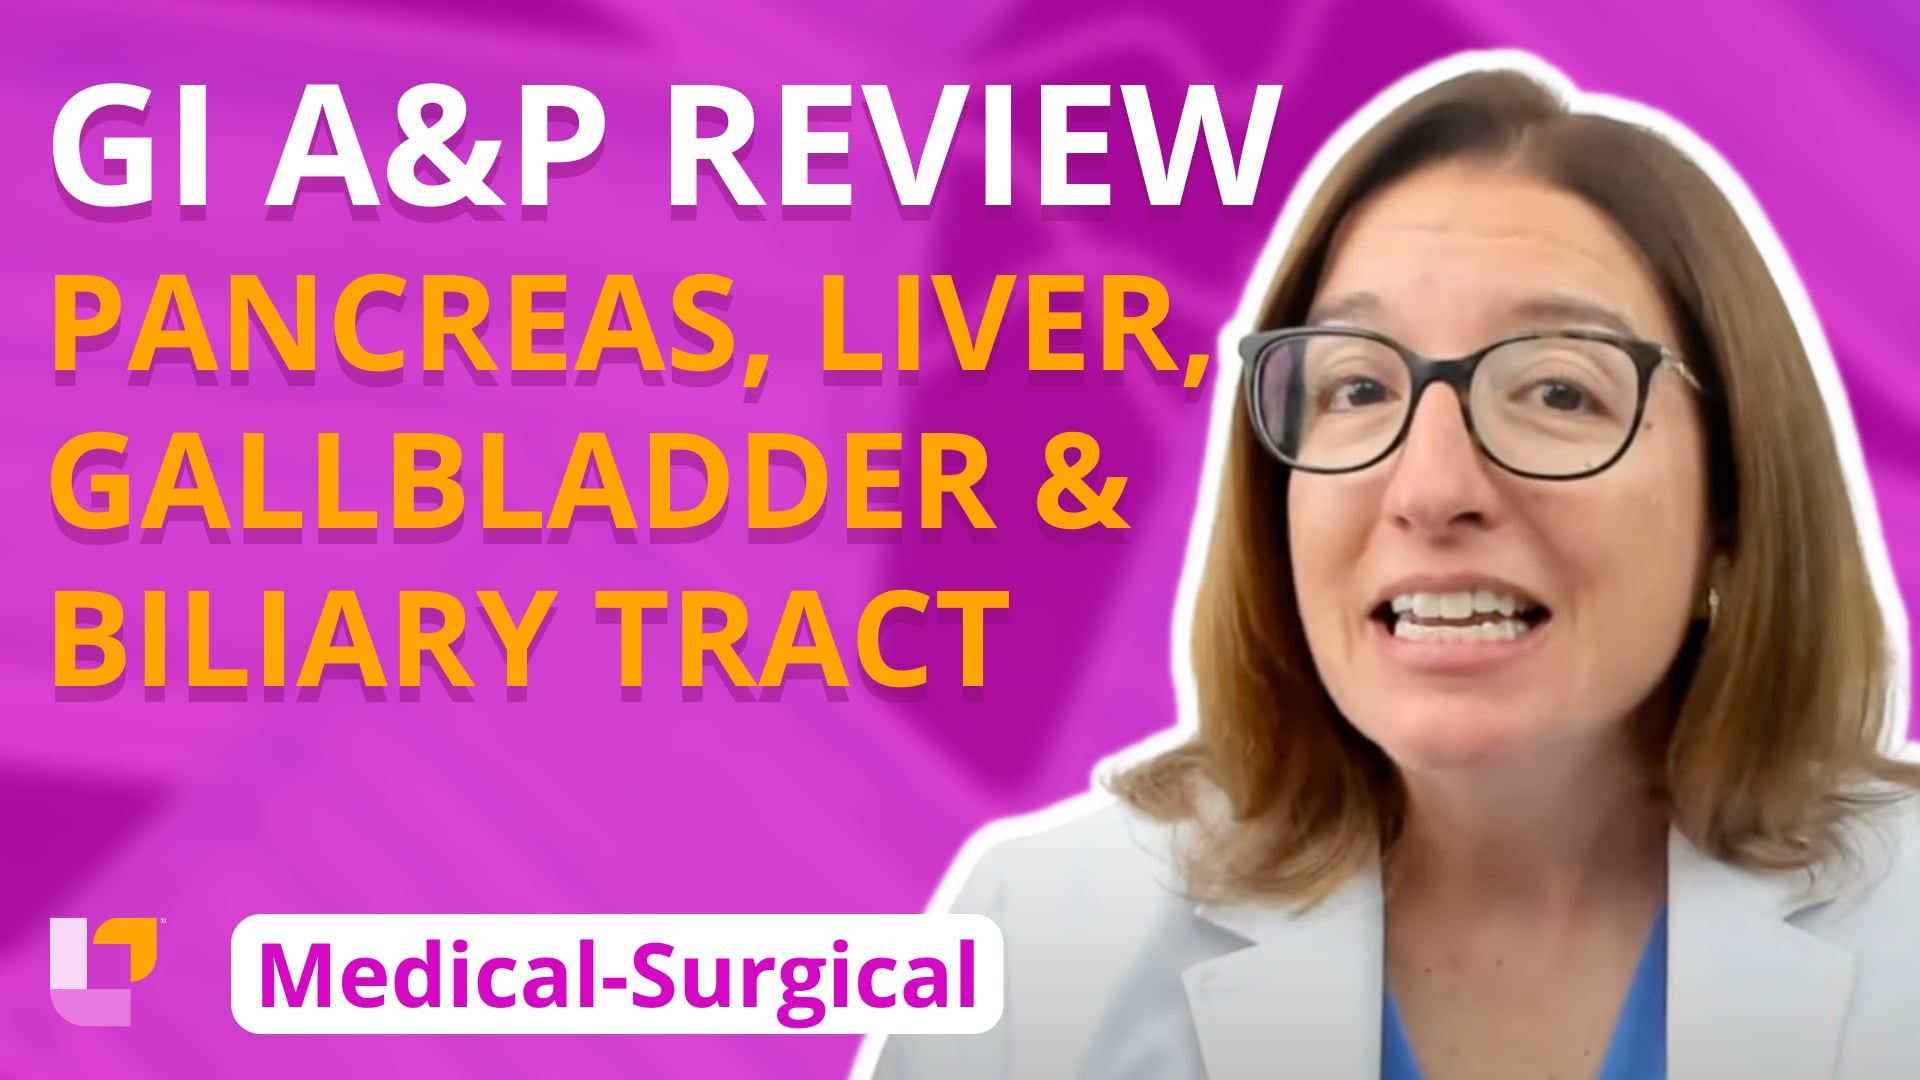 Med-Surg - Gastrointestinal System, part 2: Pancreas, Liver, Gallbladder, Biliary Tract - Anatomy and Physiology Review - LevelUpRN